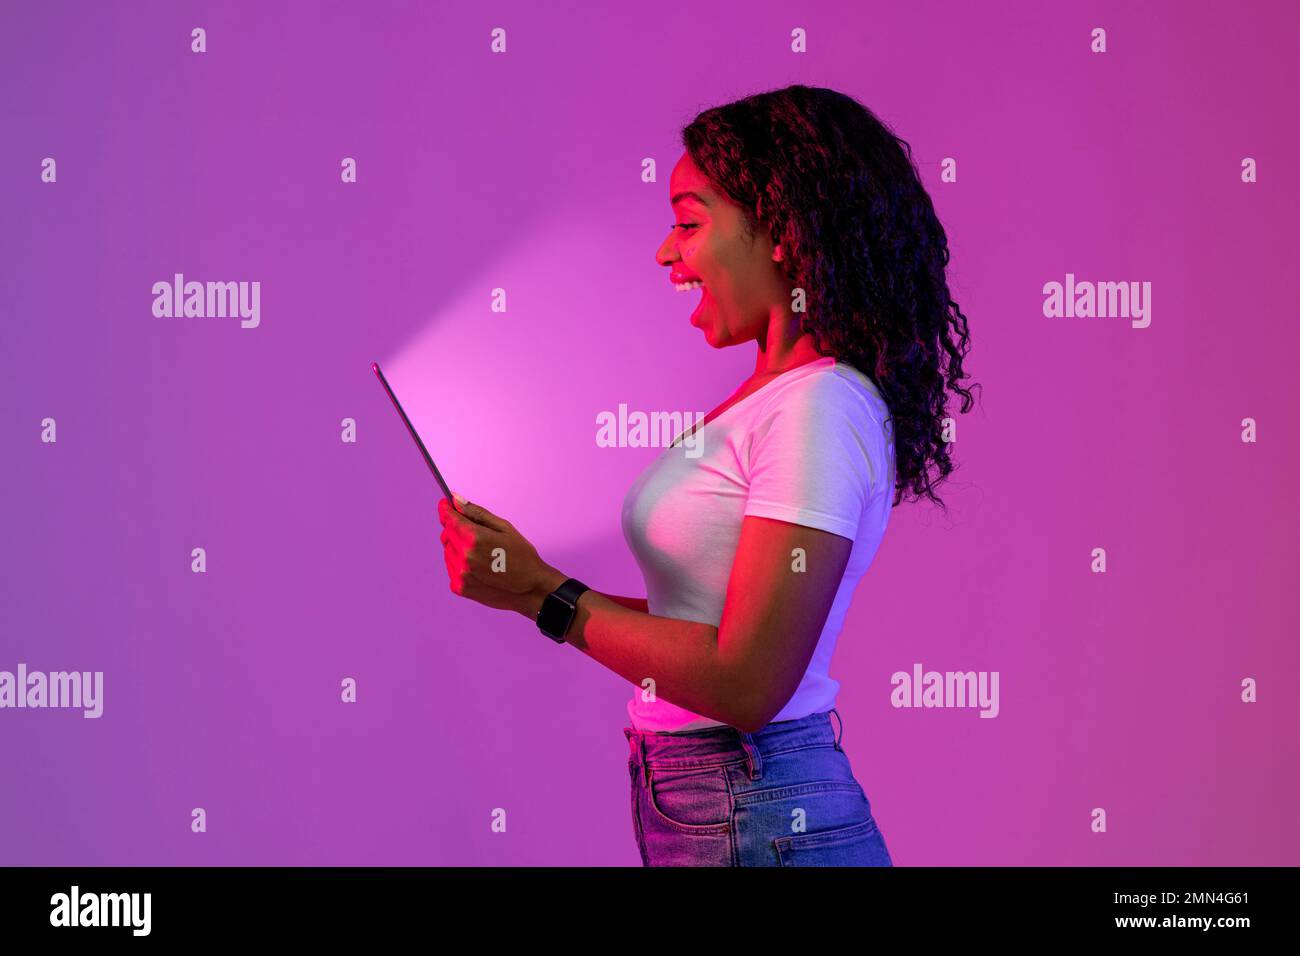 Surprised Black Woman Looking At Digital Tablet With Glowing Screen Stock Photo